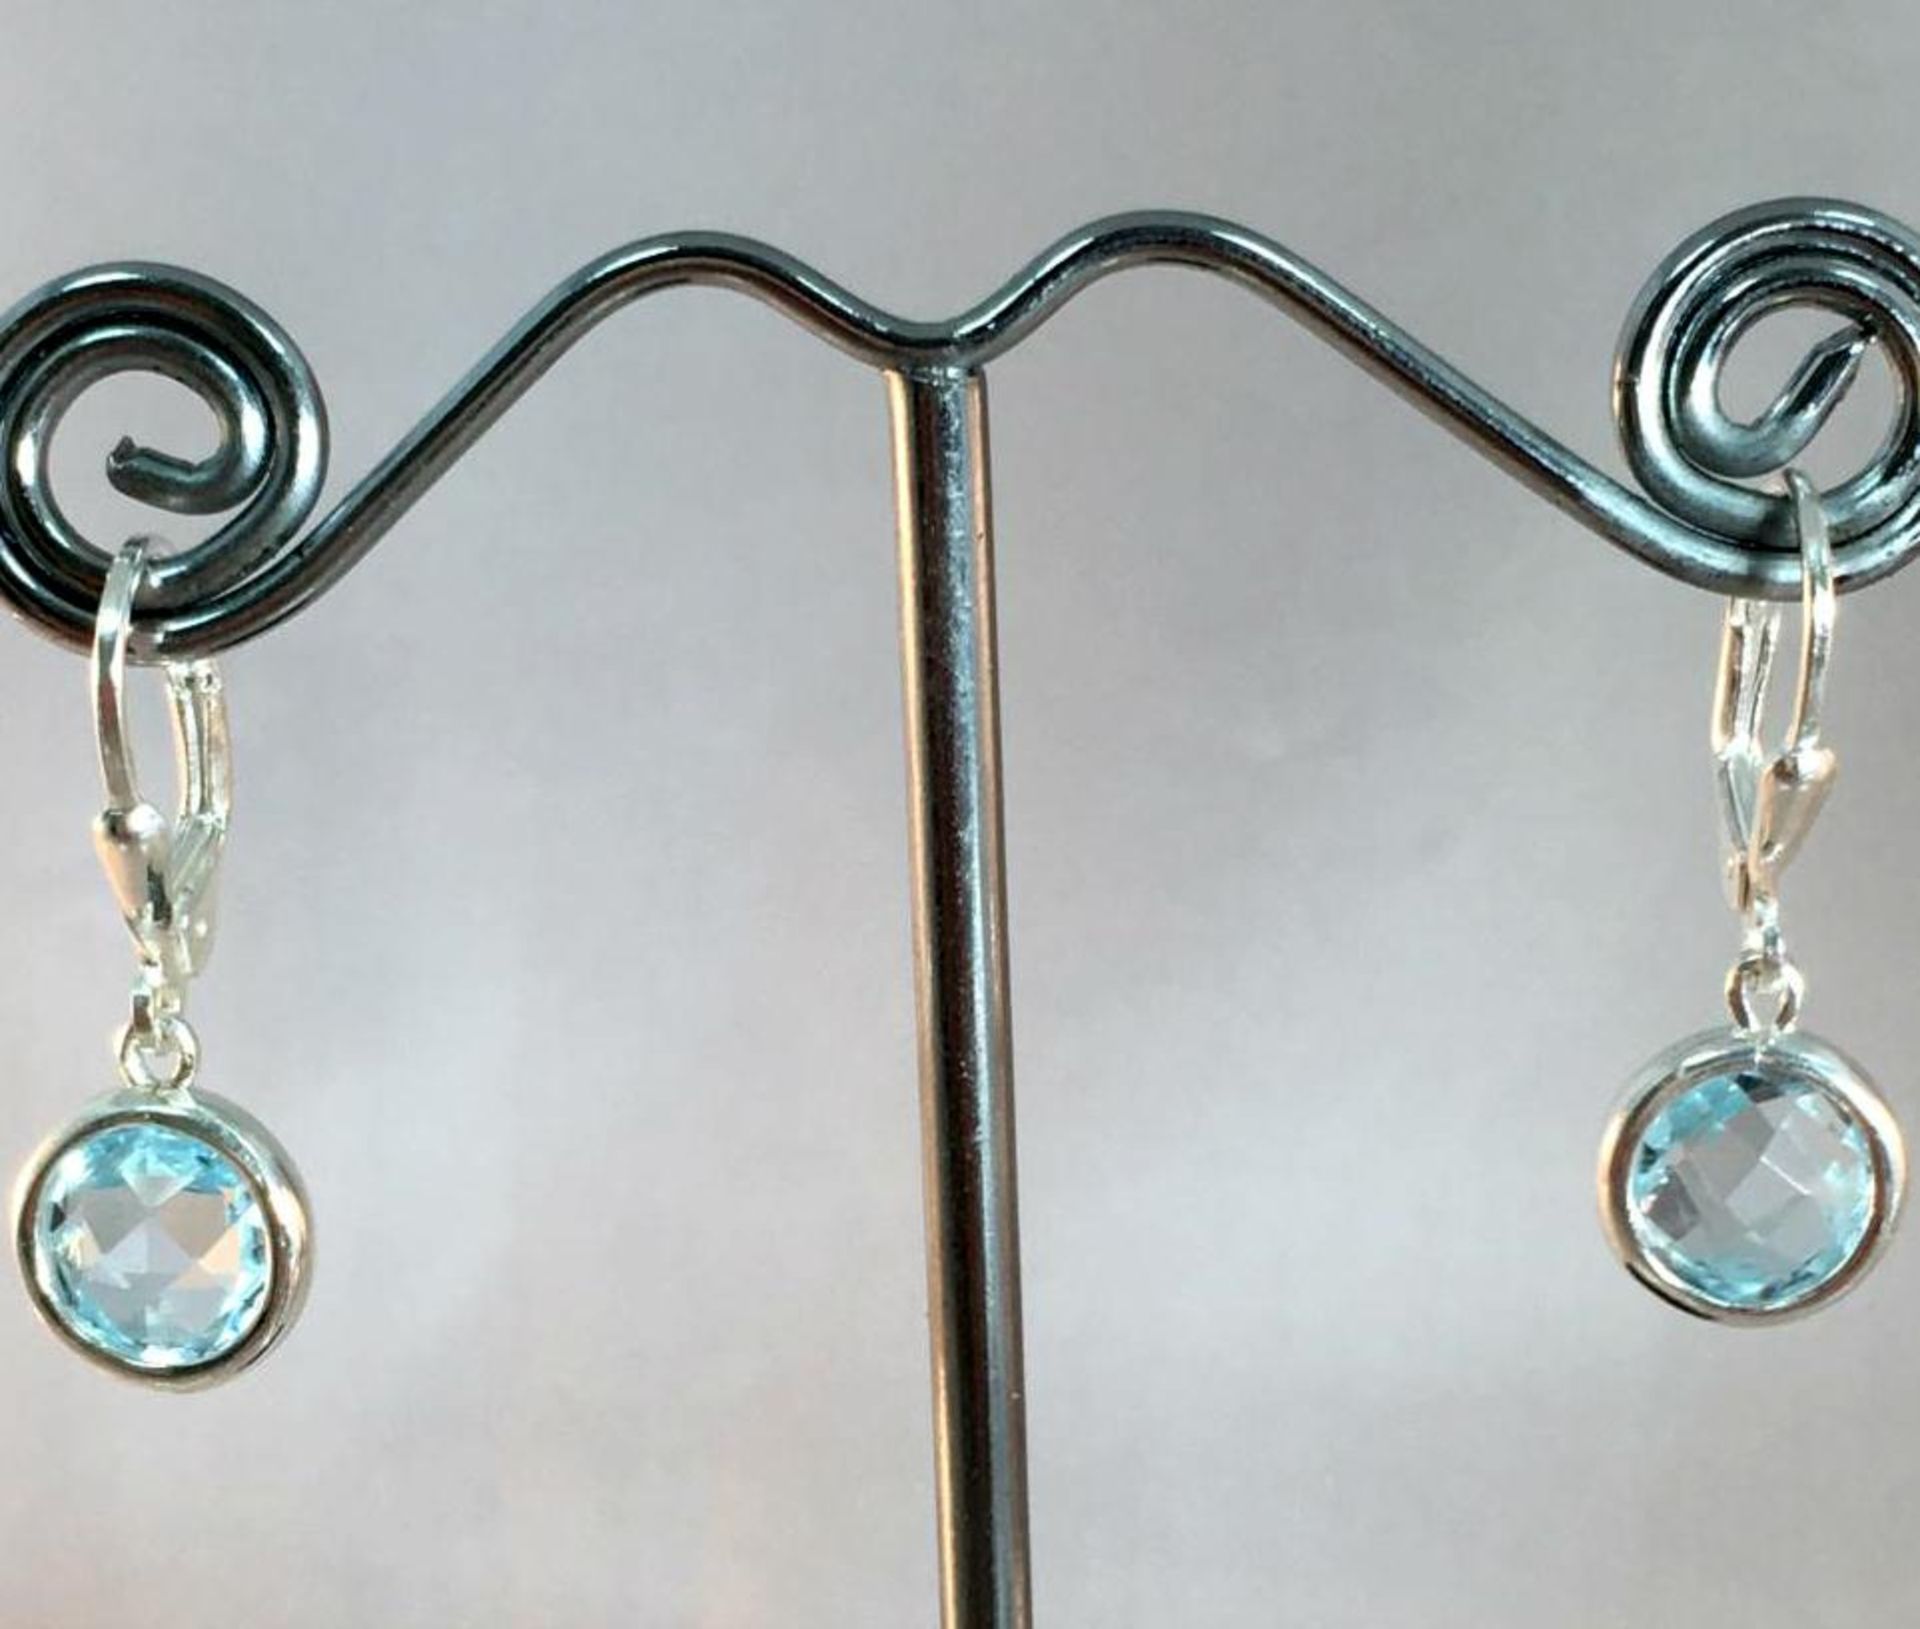 4ct Sky Blue Topaz Earrings with Lever Backs in 925 Silver. Includes free UK delivery